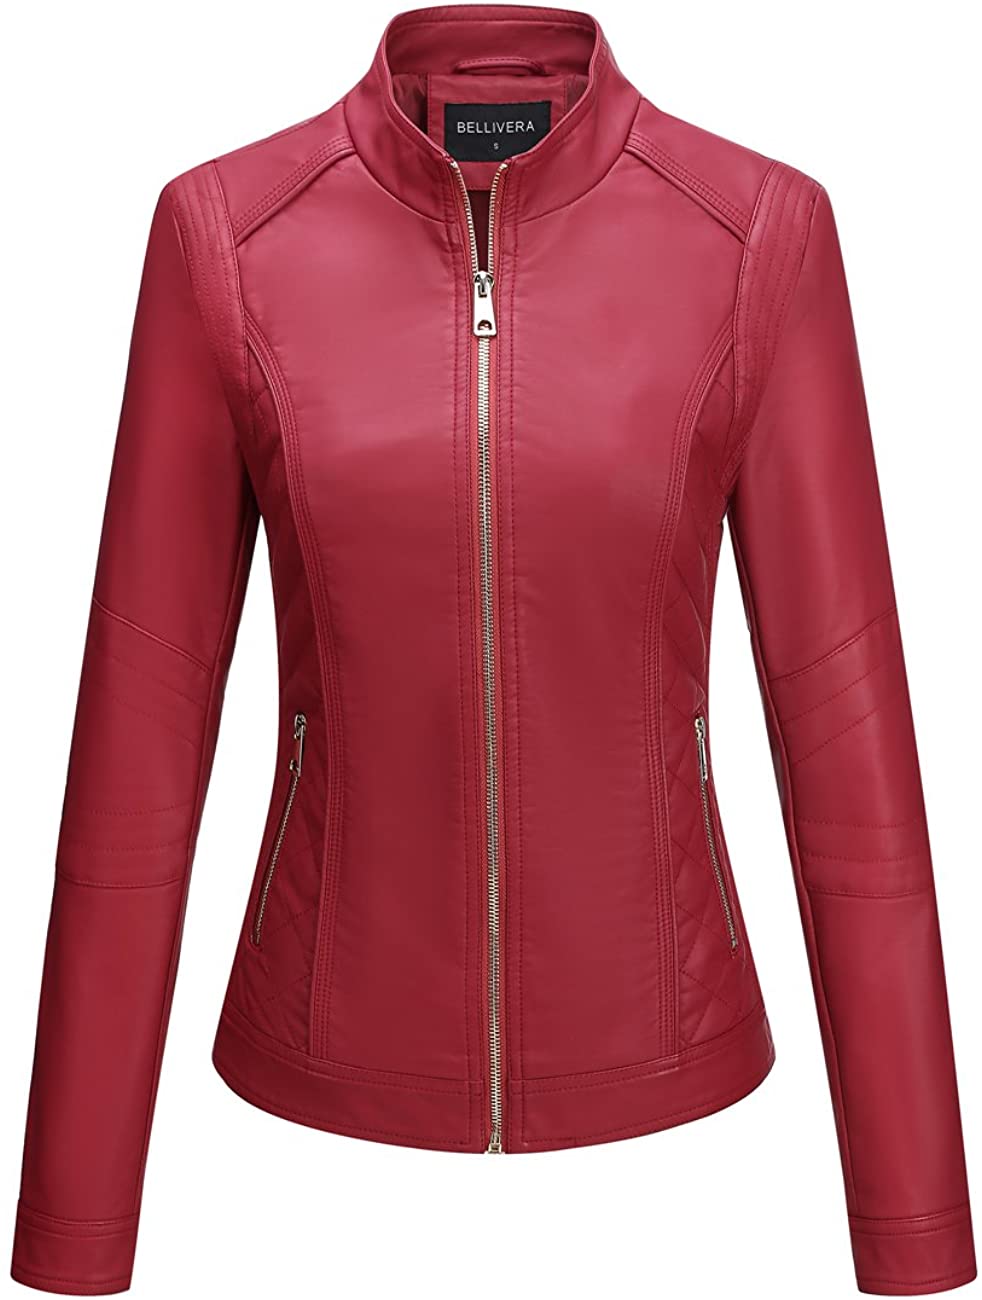 Fall and Spring Fashion Motorcycle Bike Coat Bellivera Women Faux Leather Casual Jacket 